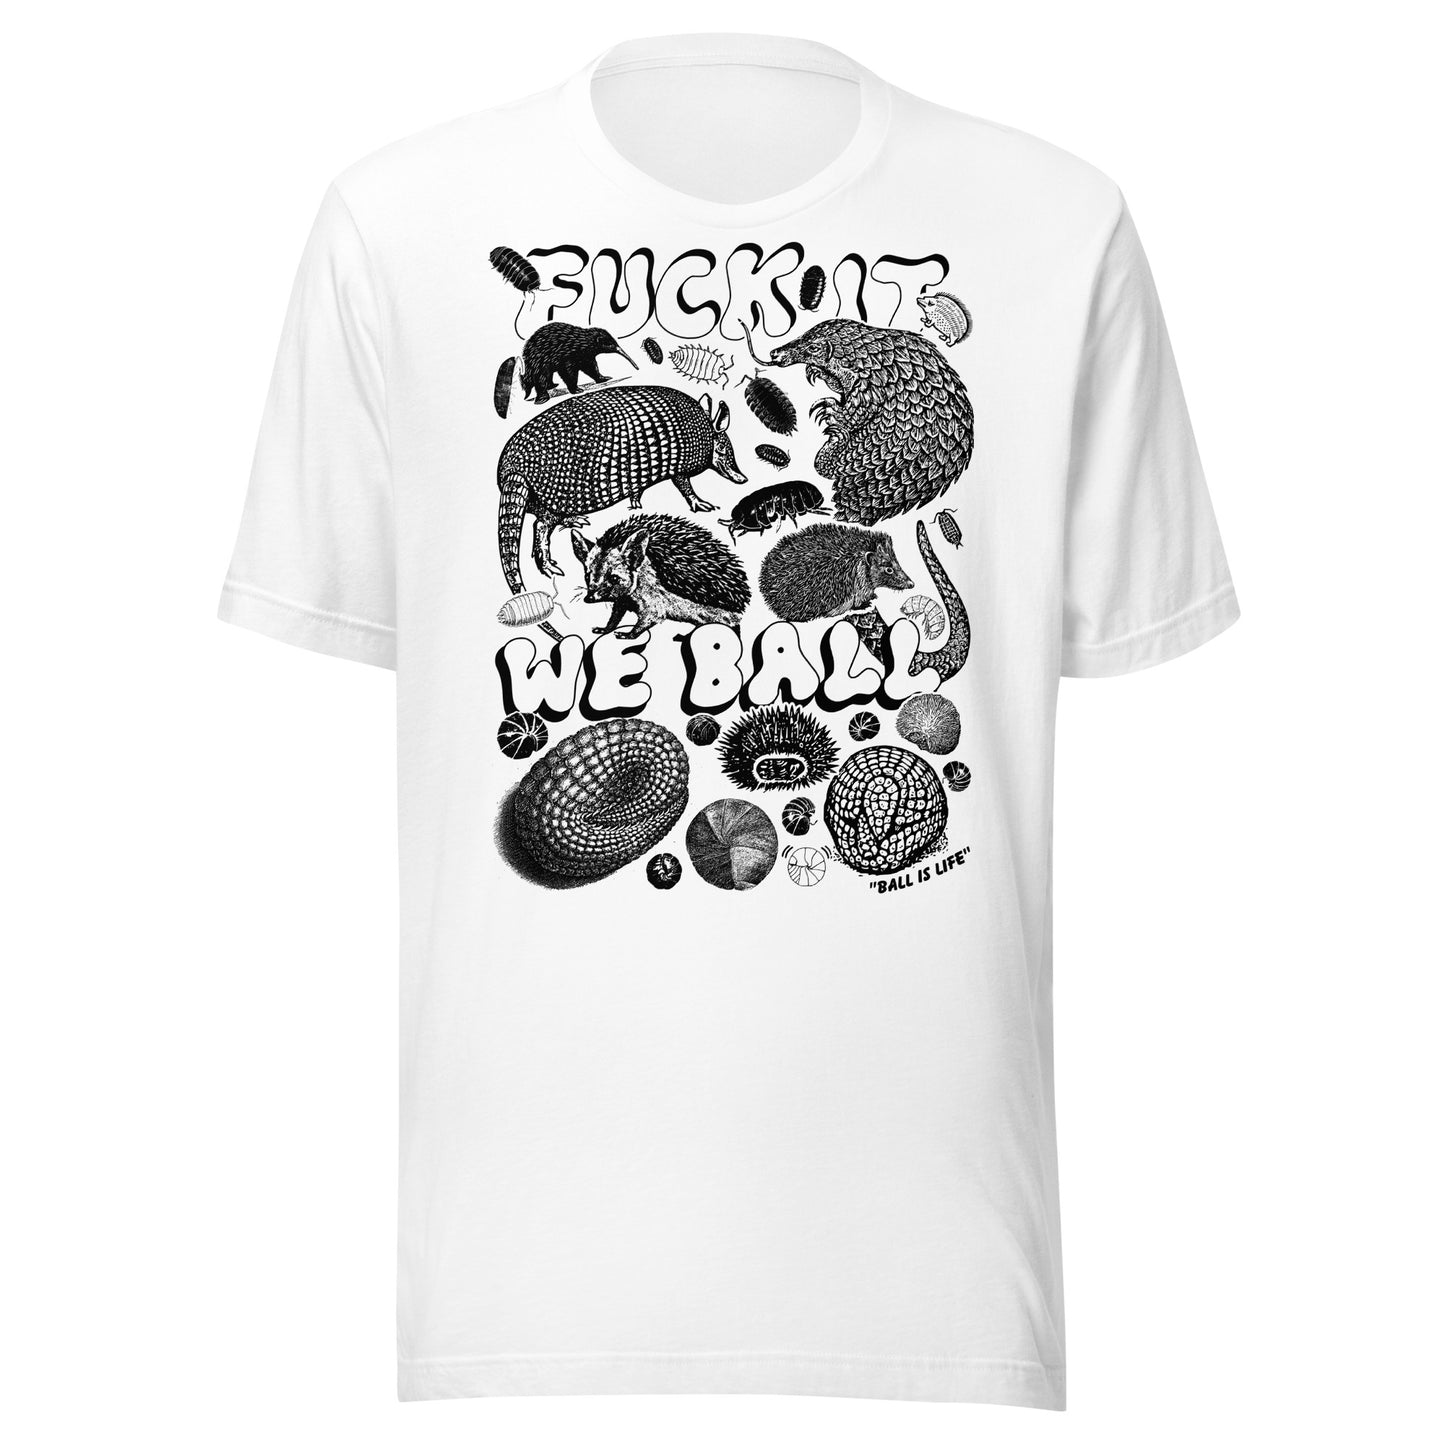 "We Ball Series: Ultimate Ballers" Unisex t-shirt